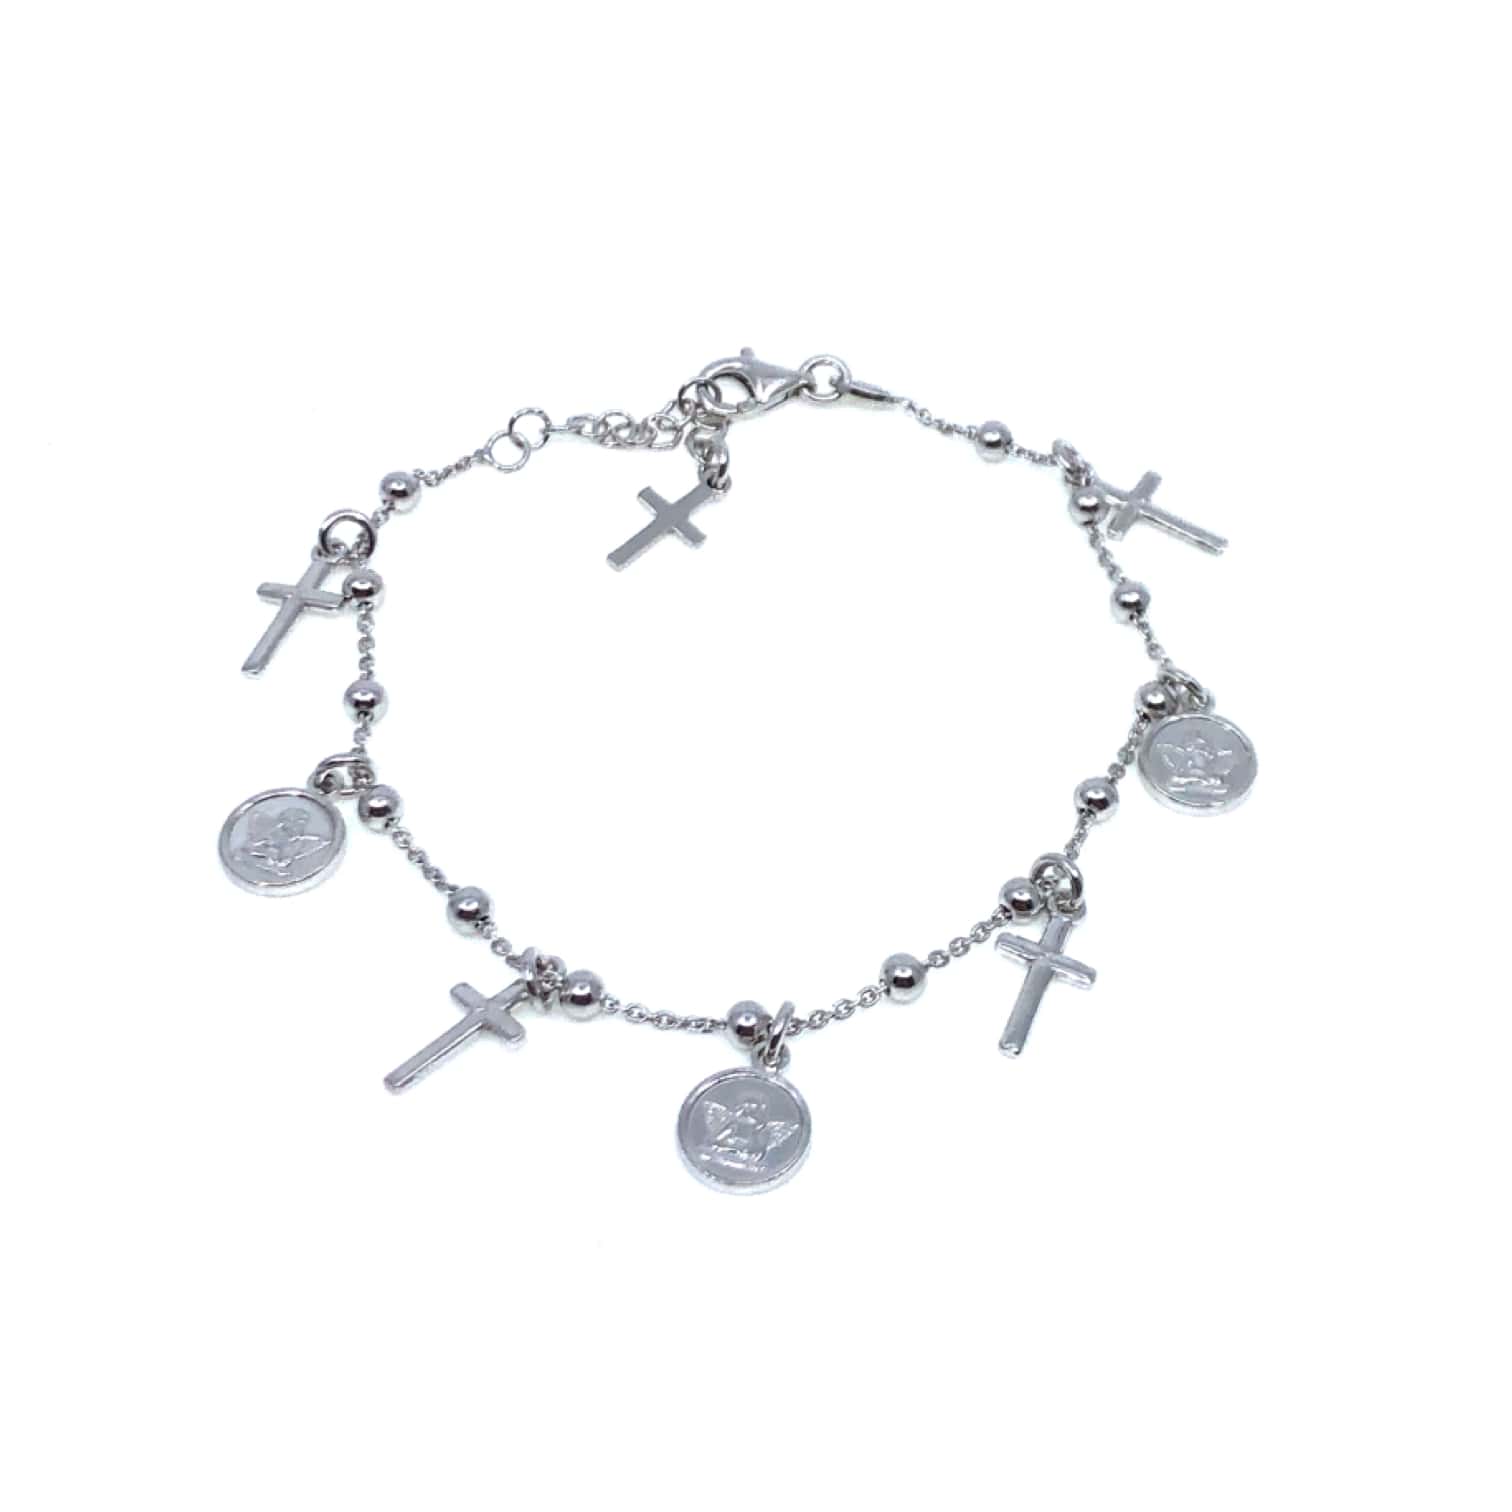 Silver bracelet with angel medal and cross - Galleria Mariana